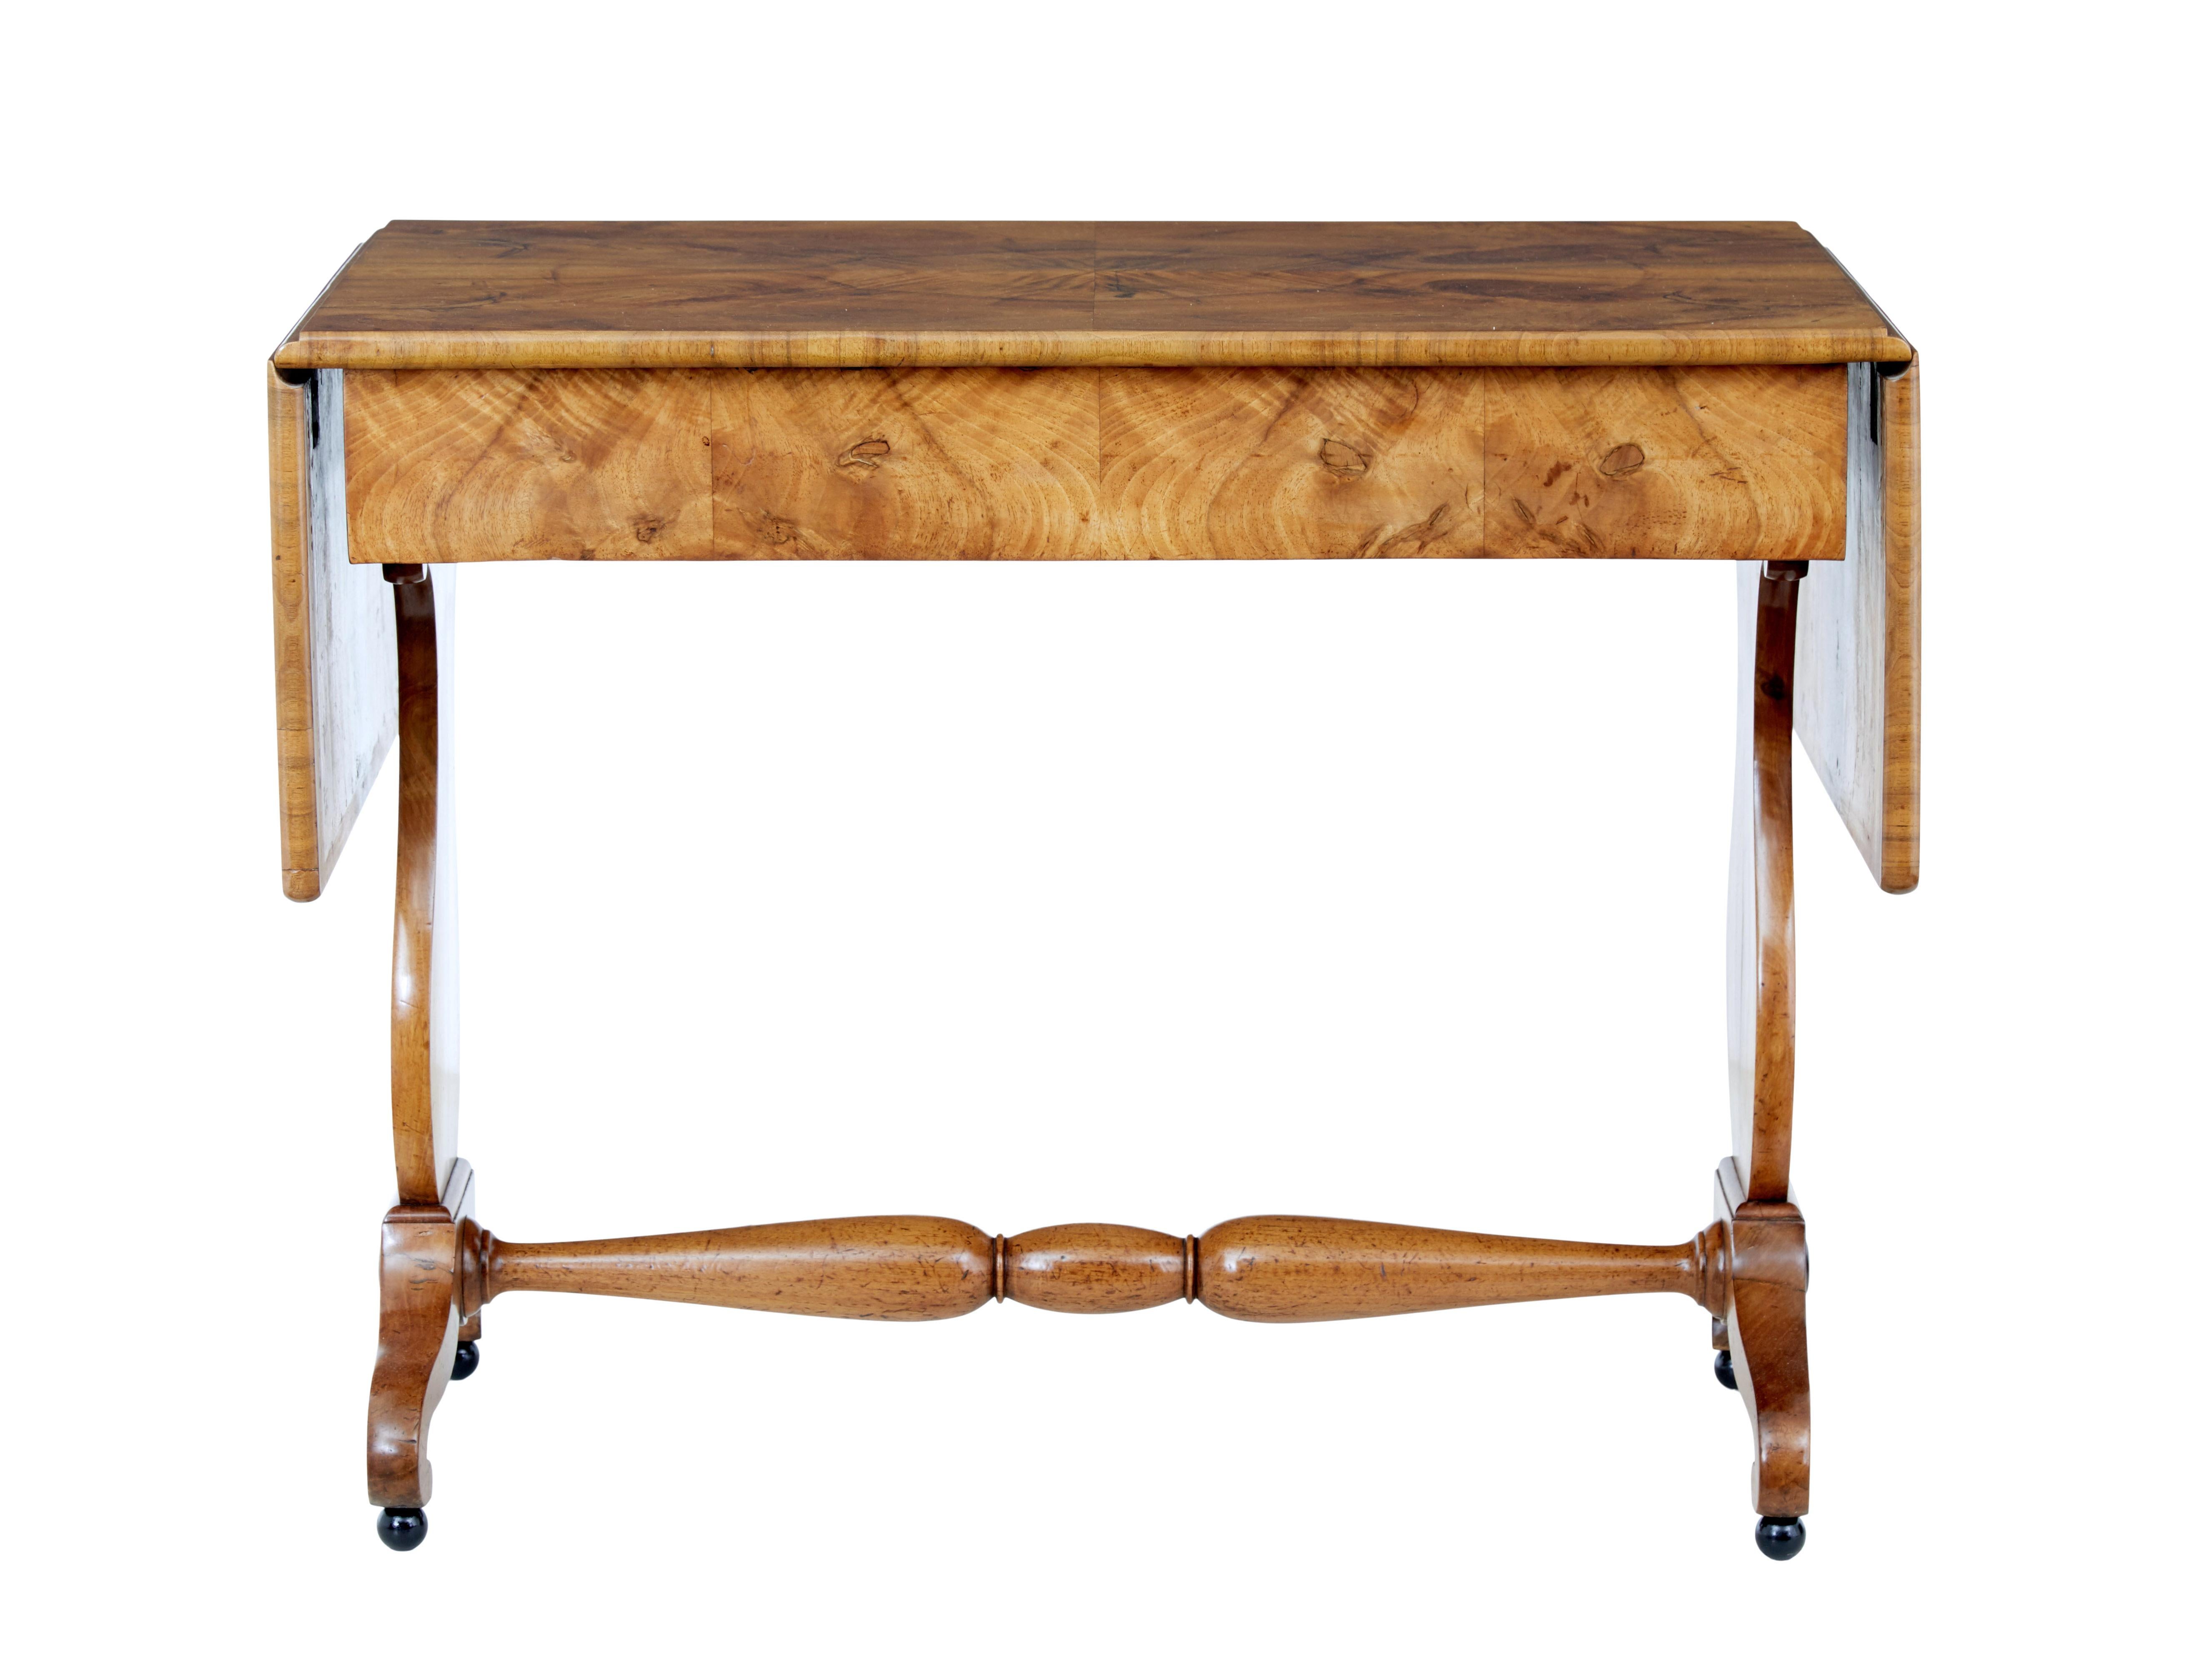 Swedish Empire Revival 1870s Birch Sofa Table with Drop Leaves and Carved Legs For Sale 1